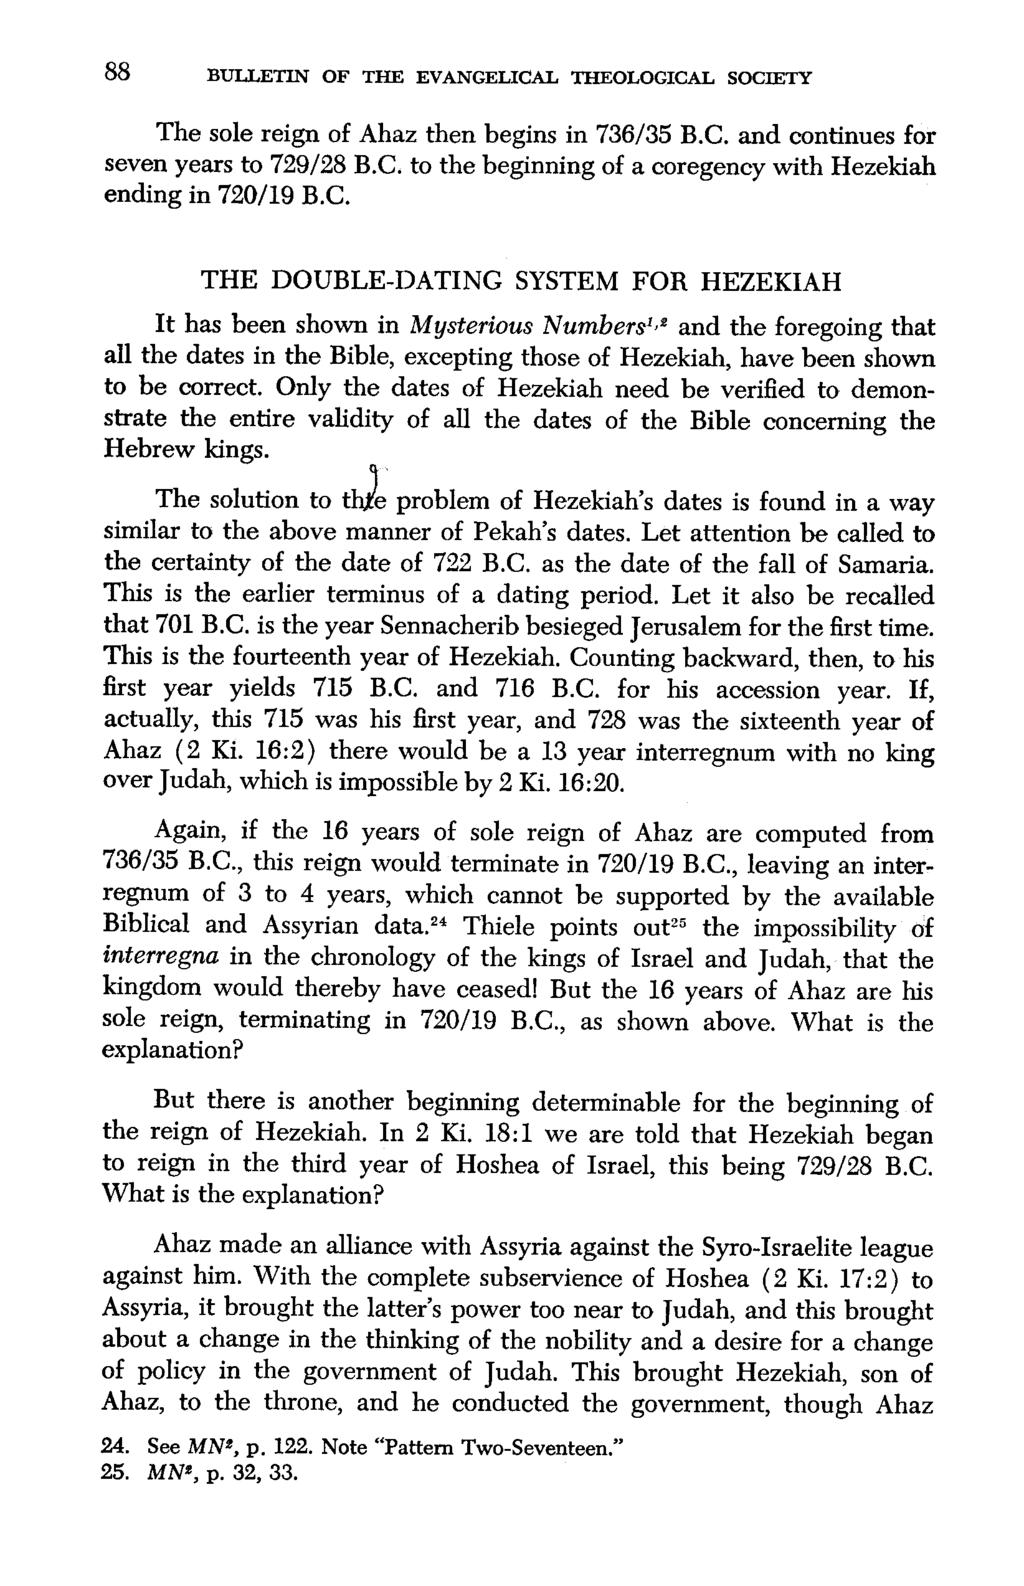 88 BULLETIN OF THE EVANGELICAL THEOLOGICAL SOCIETY The sole reign of Ahaz then begins in 736/35 B.C. and continues for seven years to 729/28 B.C. to the beginning of a coregency with Hezekiah ending in 720/19 B.